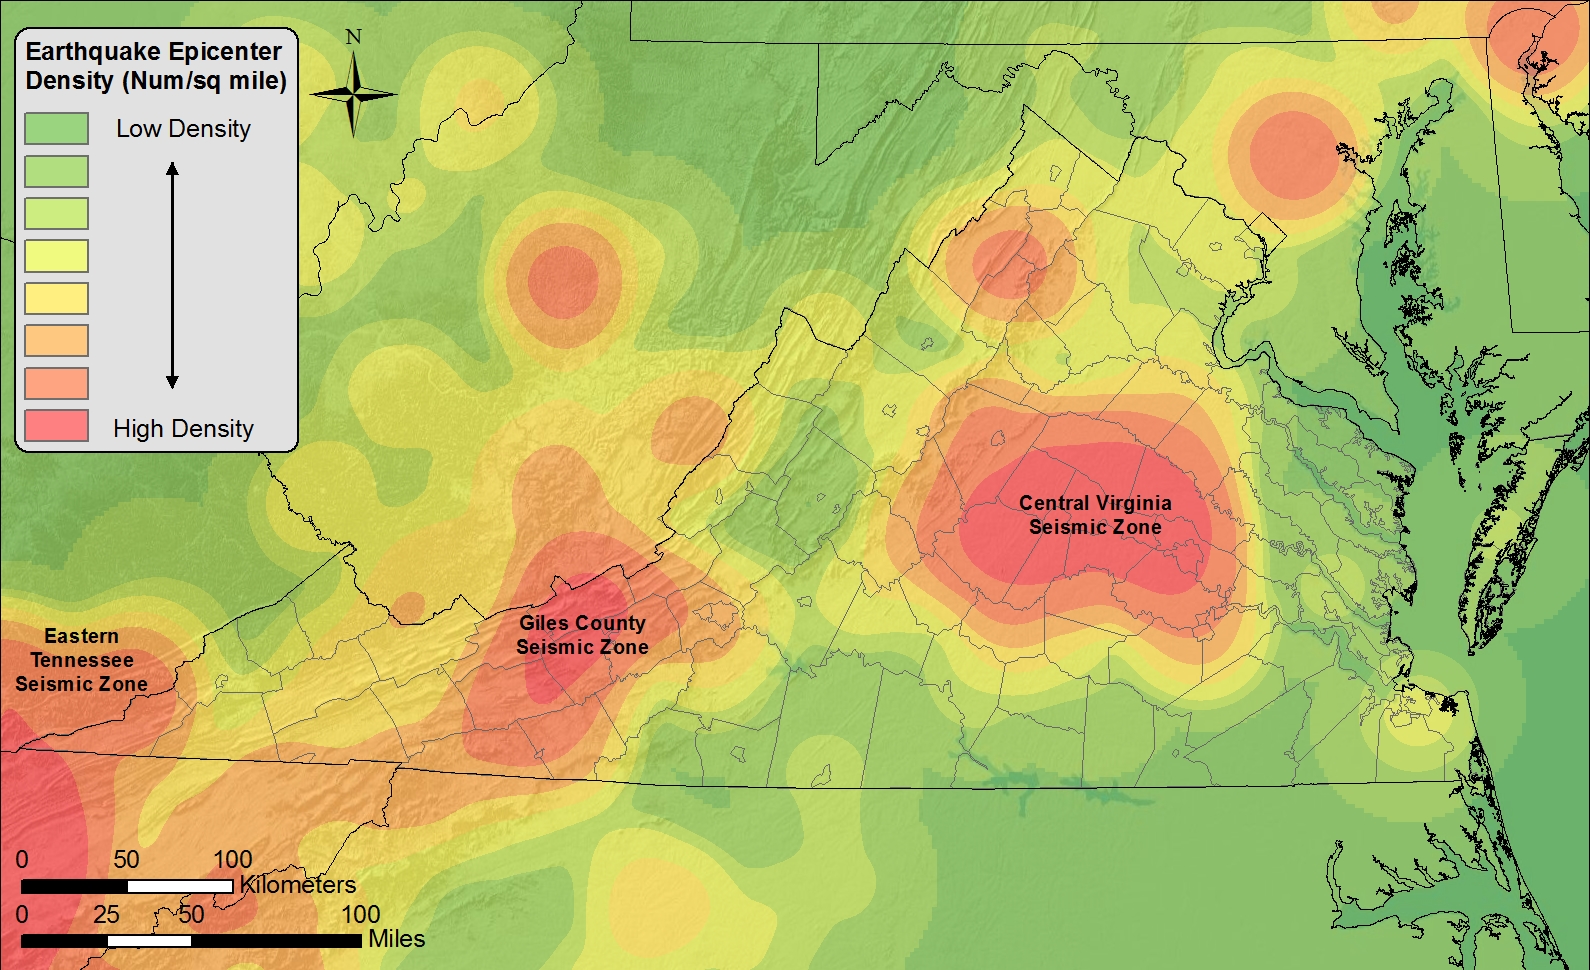 Seismic Zone map of Virginia with yellow, green, red, and orange colors